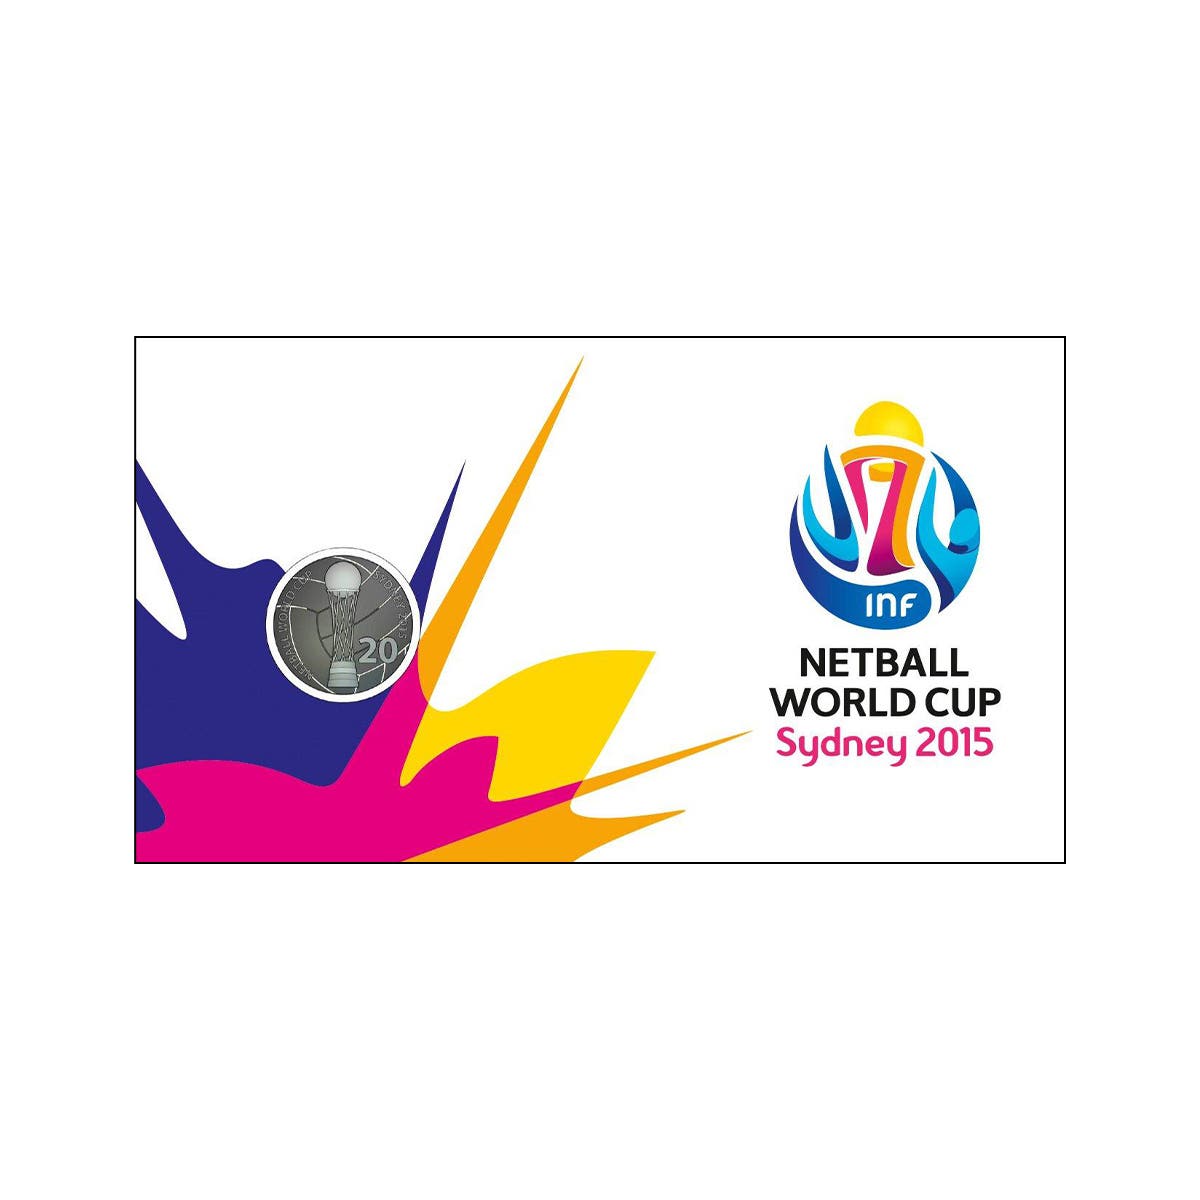 Netball World Cup Sydney 2015 20c Uncirculated Coin